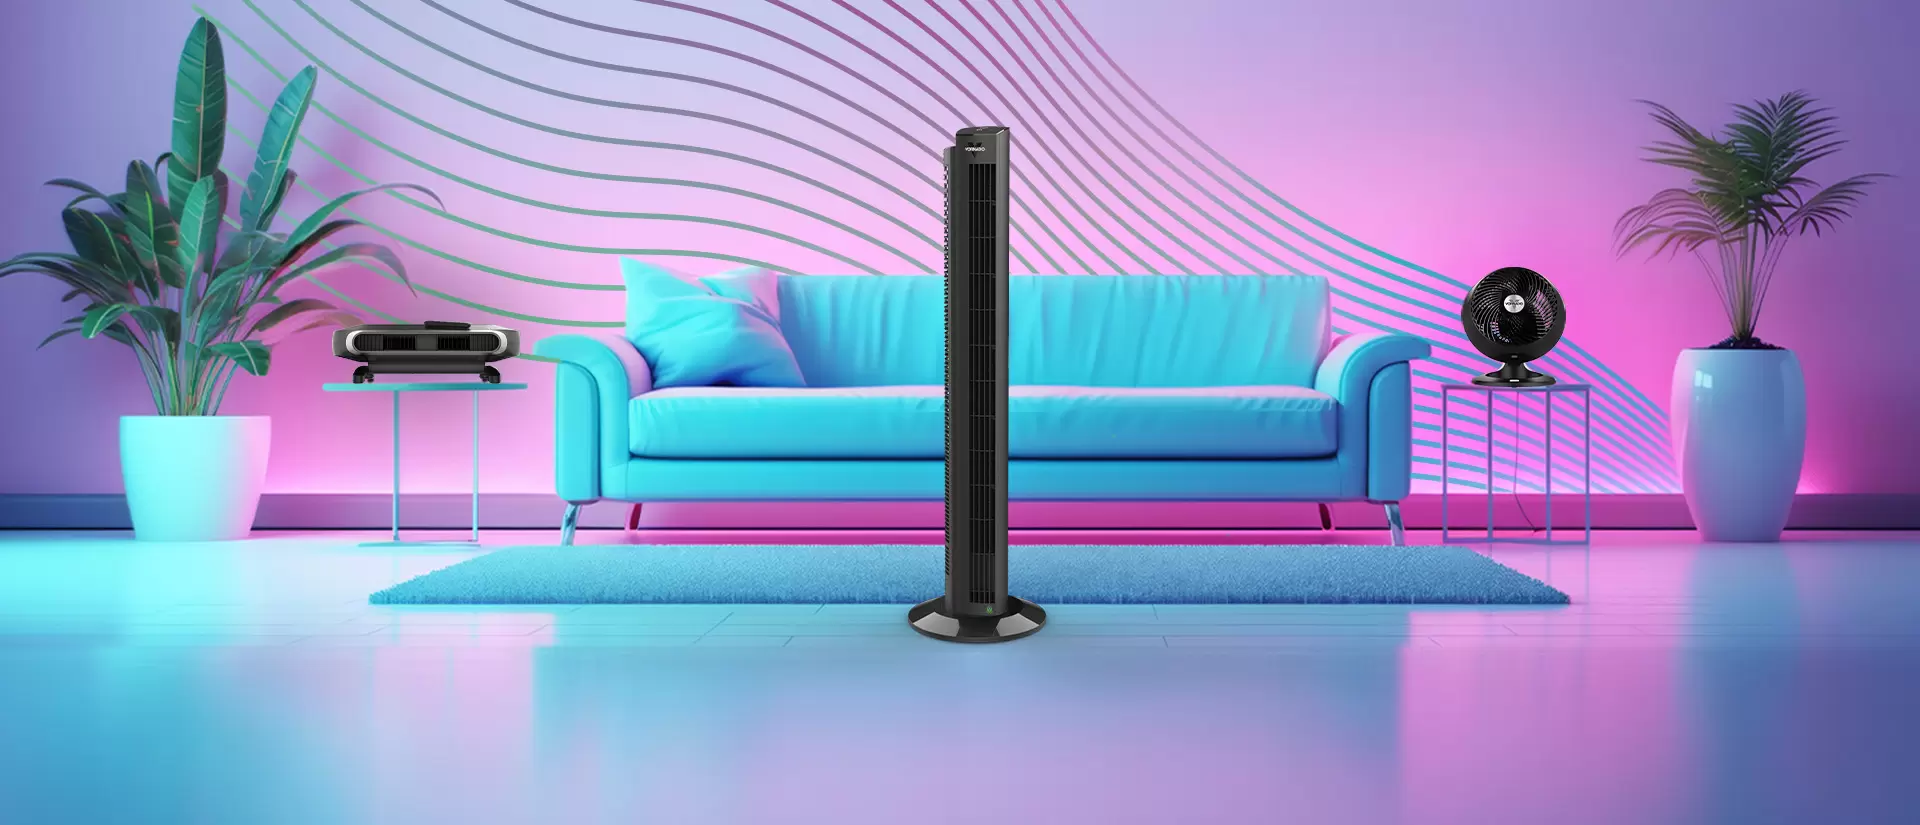 Lifestyle image of a living room with a black AXL Oscillating Circulator, OZI42DC Energy-Saving Tower Circulator, and 660 AE Alexa-Enabled Floor Circulator. The living room has a neon pink-purple gradient with a bright blue couch and rug with tropical plants. The products are prominently featured.